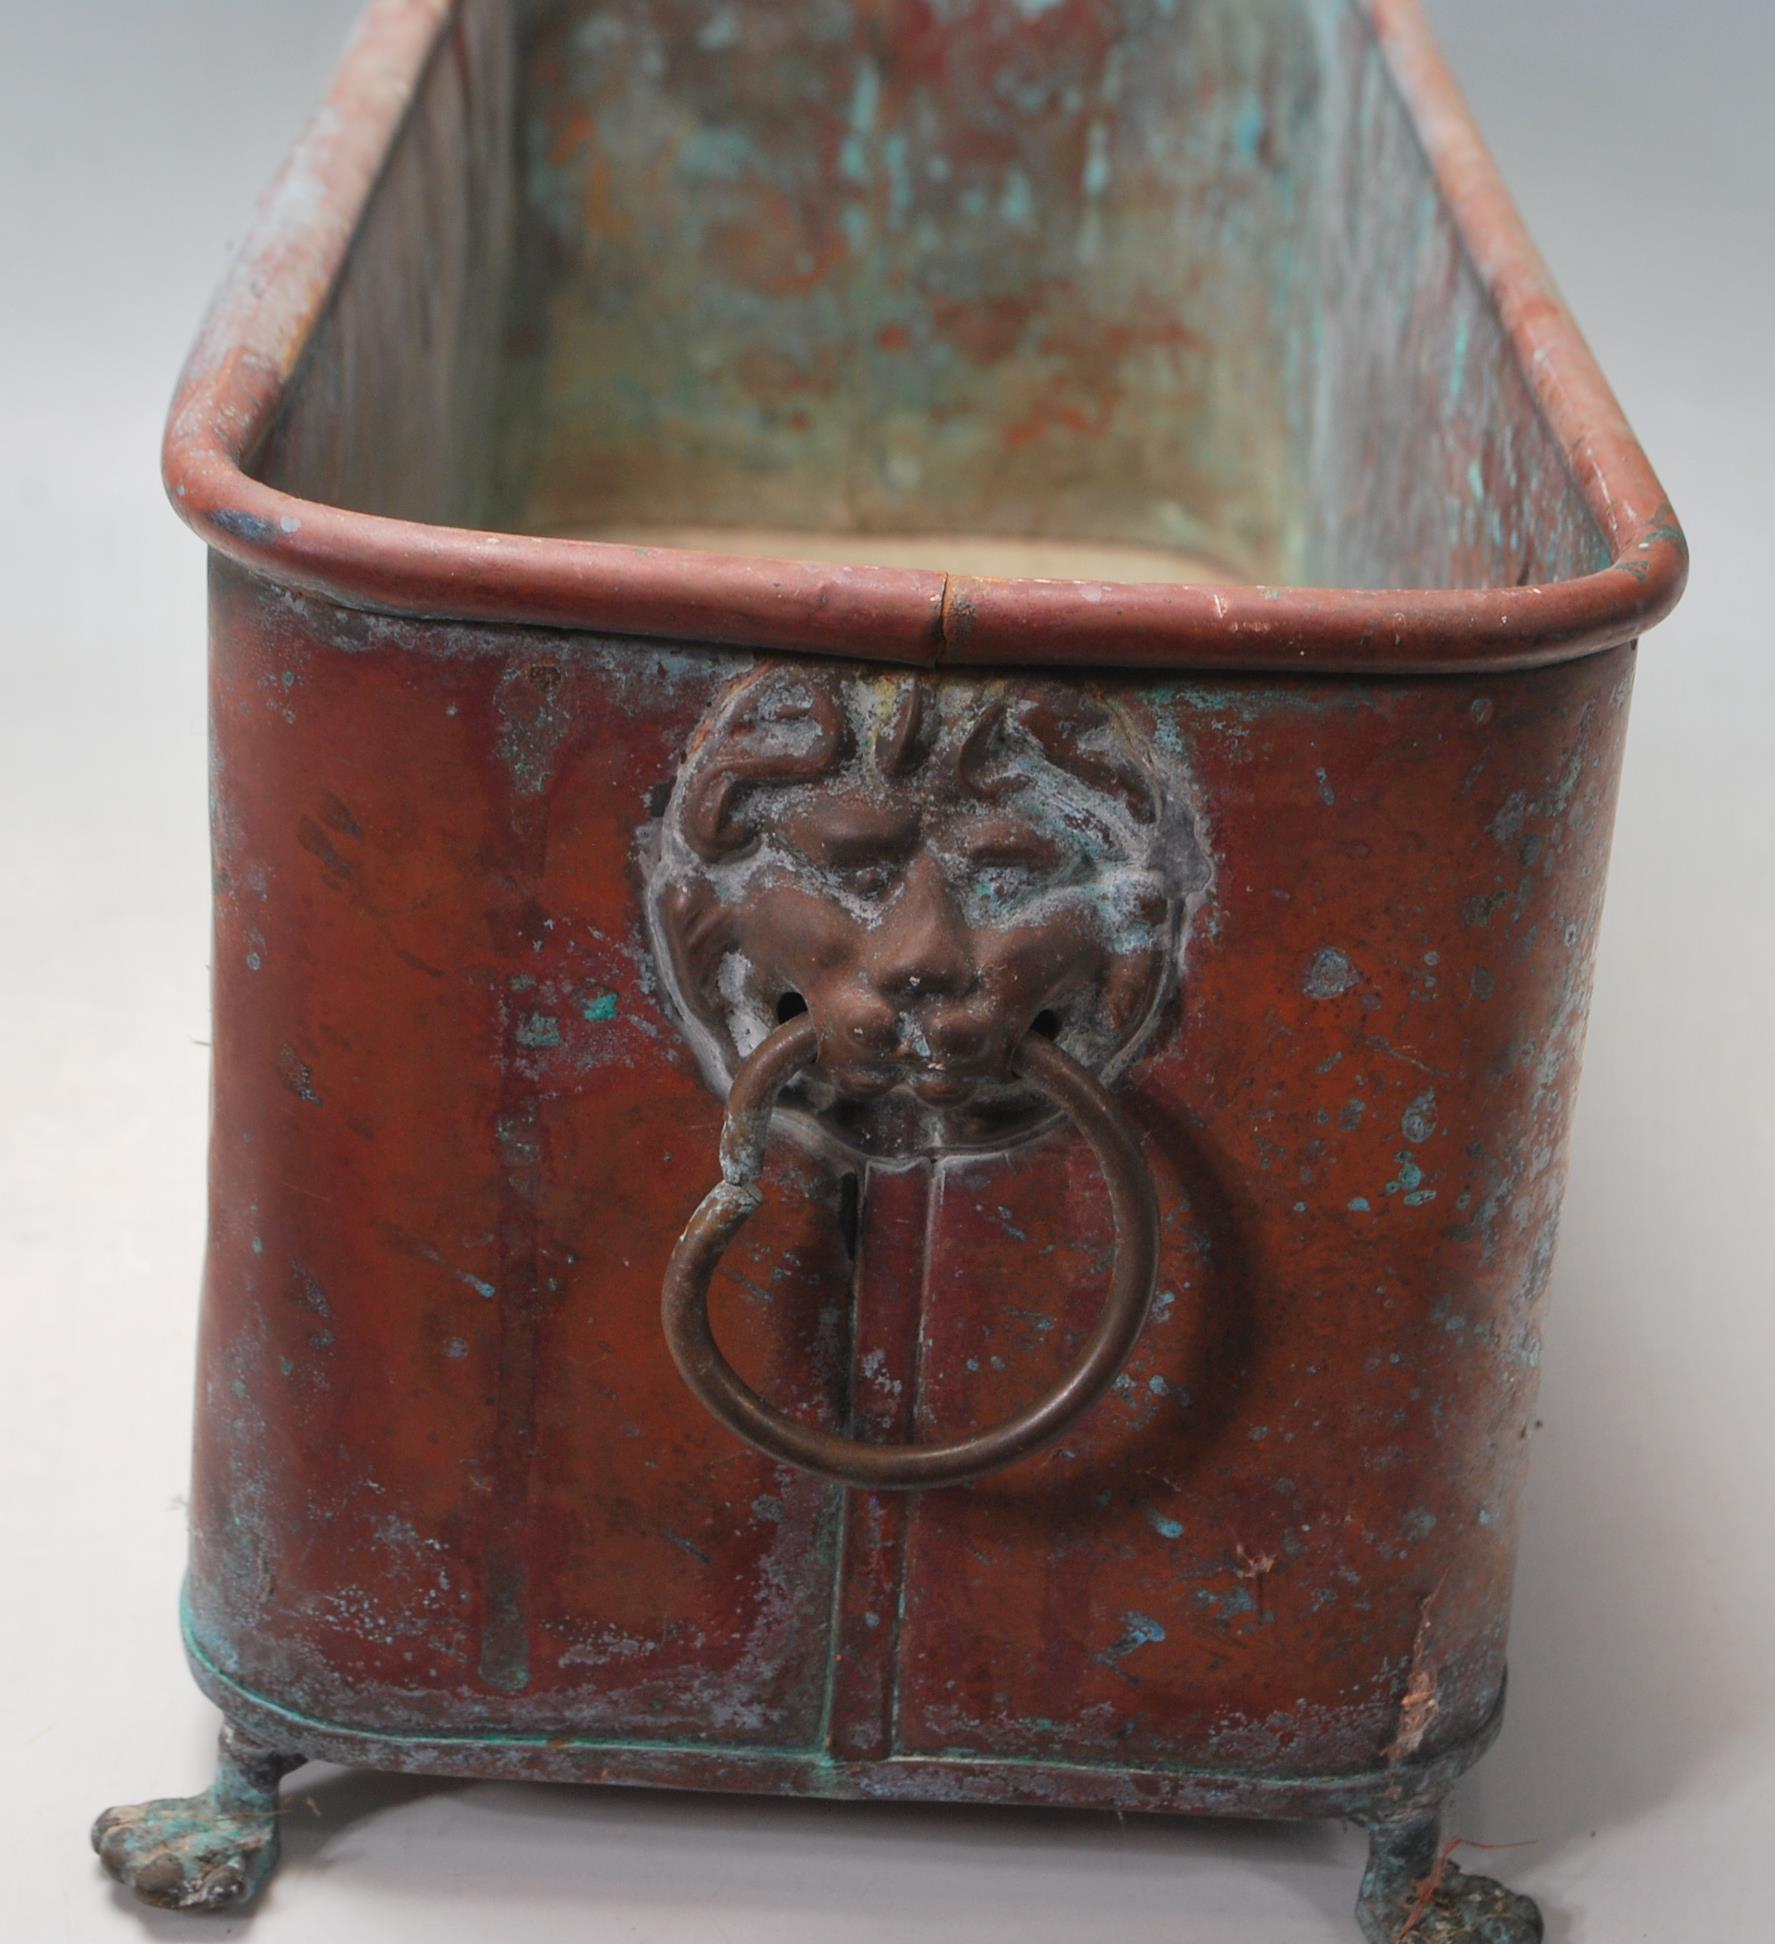 ANTIQUE COOPER PLANTER TROUGH WITH LION HANDLES AND CLAW FEET - Image 6 of 6